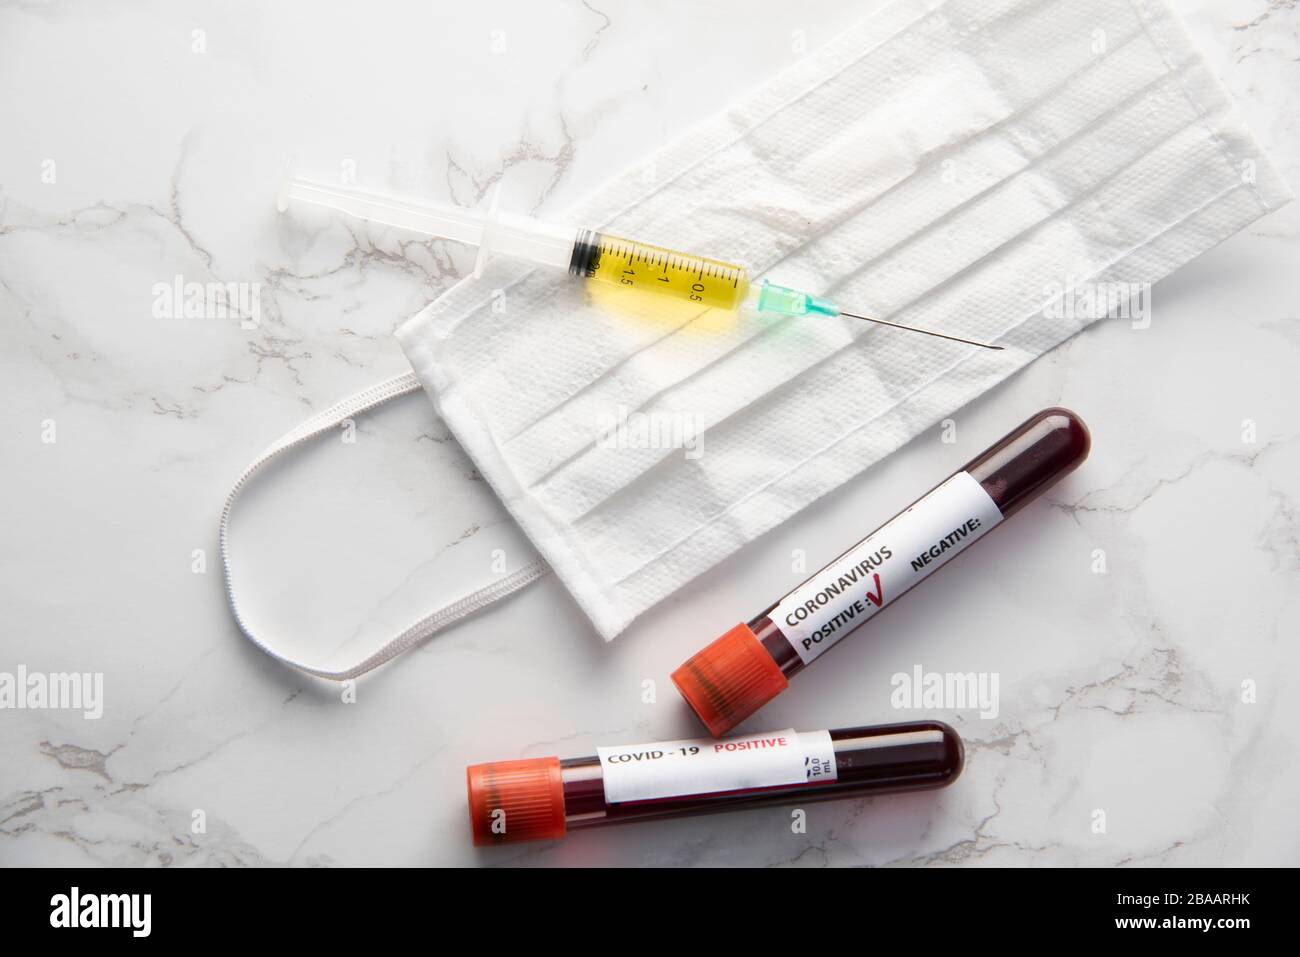 coronavirus covid-19 vaccine with blood sample and protection medical mask Stock Photo